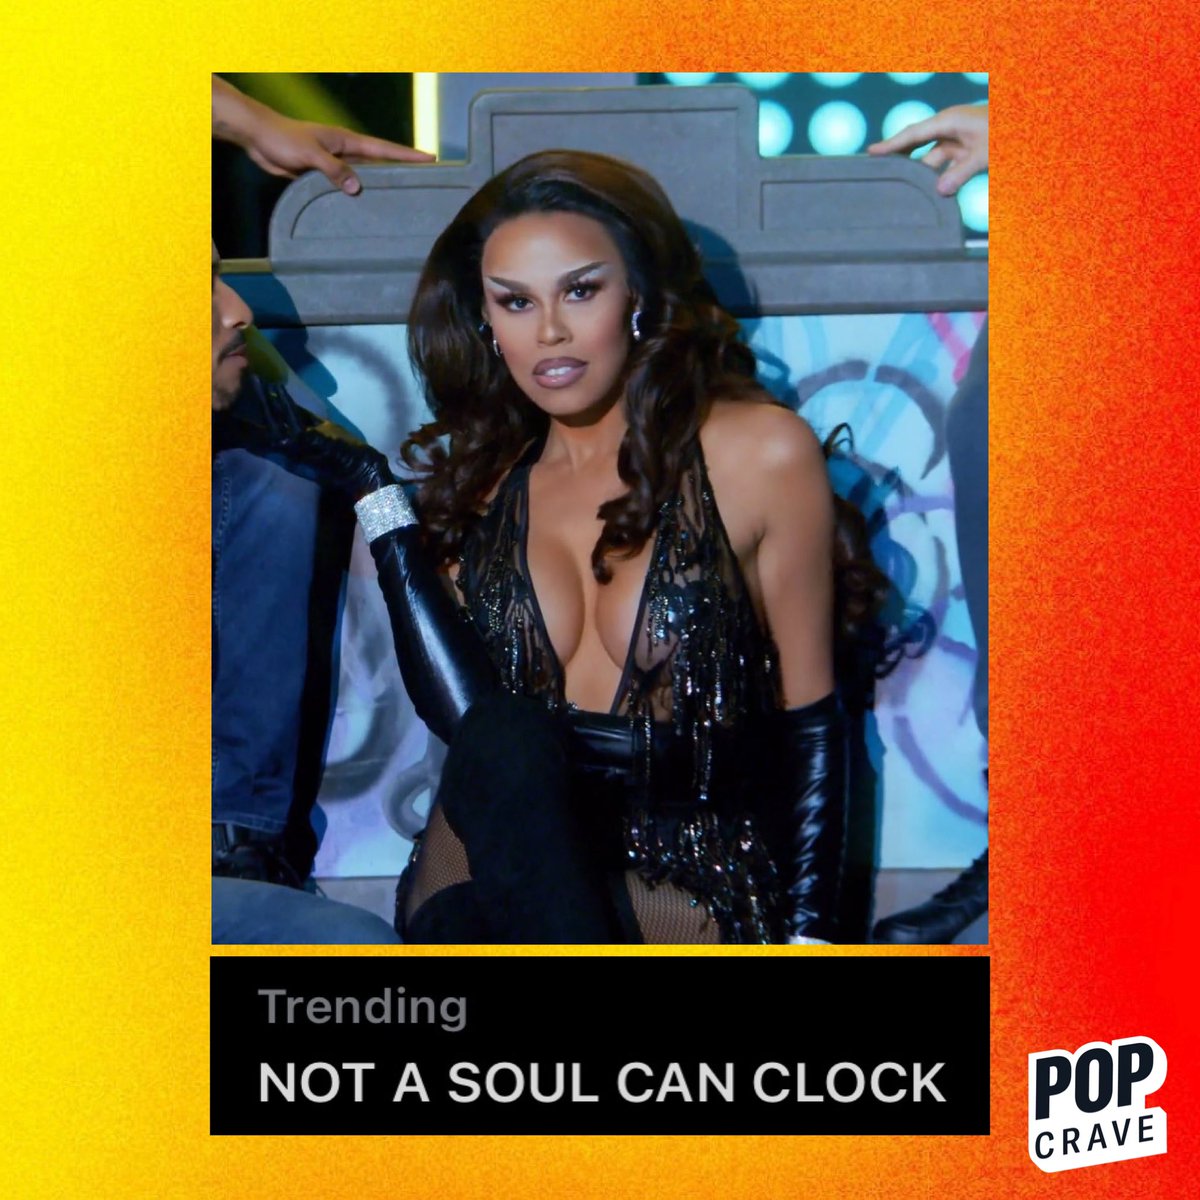 'NOT A SOUL CAN CLOCK' trends following viral 'RuPaul’s Drag Race #AllStars8' performance from contestant Monica Beverly Hillz.